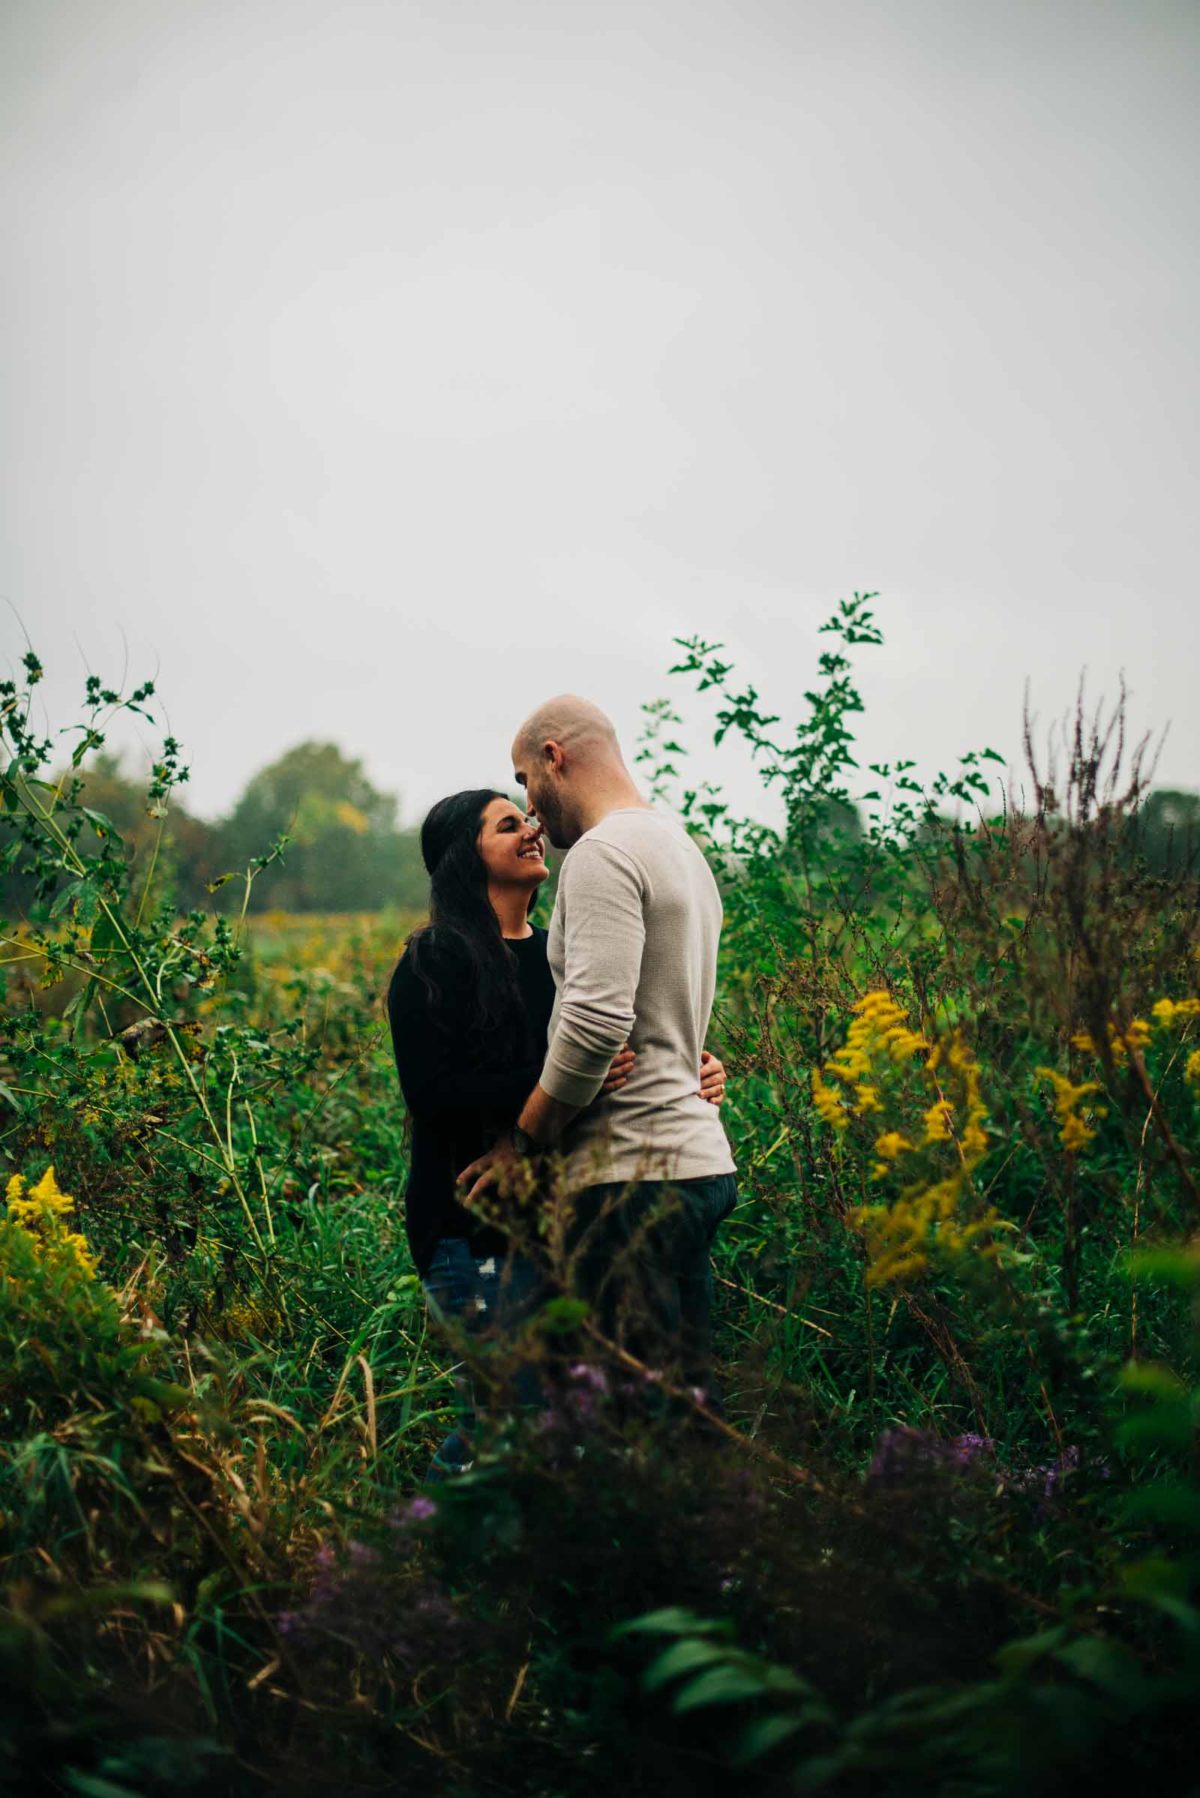 A moody engagement session in the rain